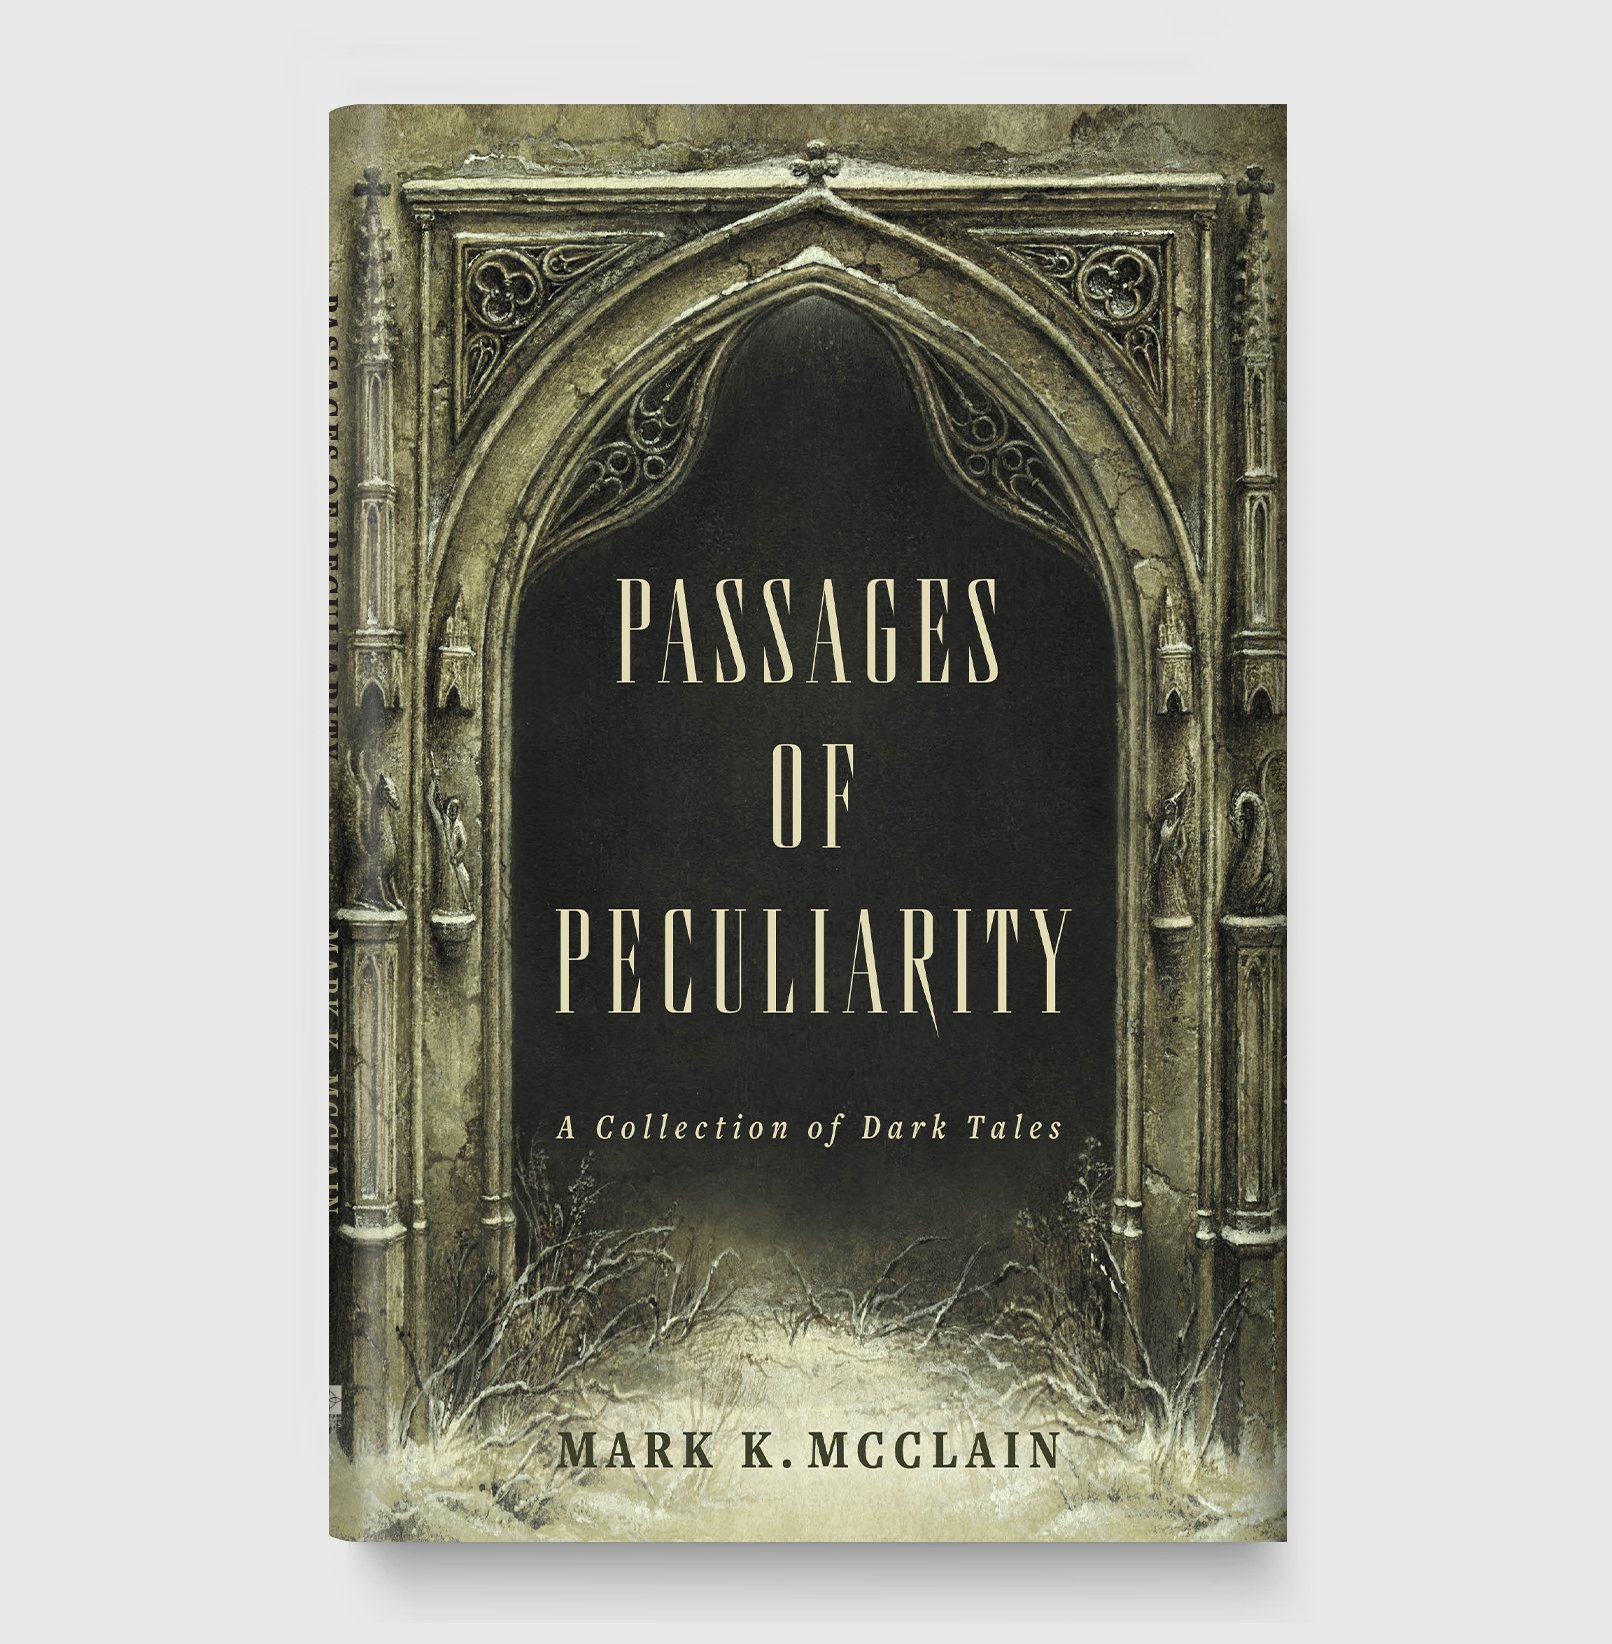 Passages of Peculiarity